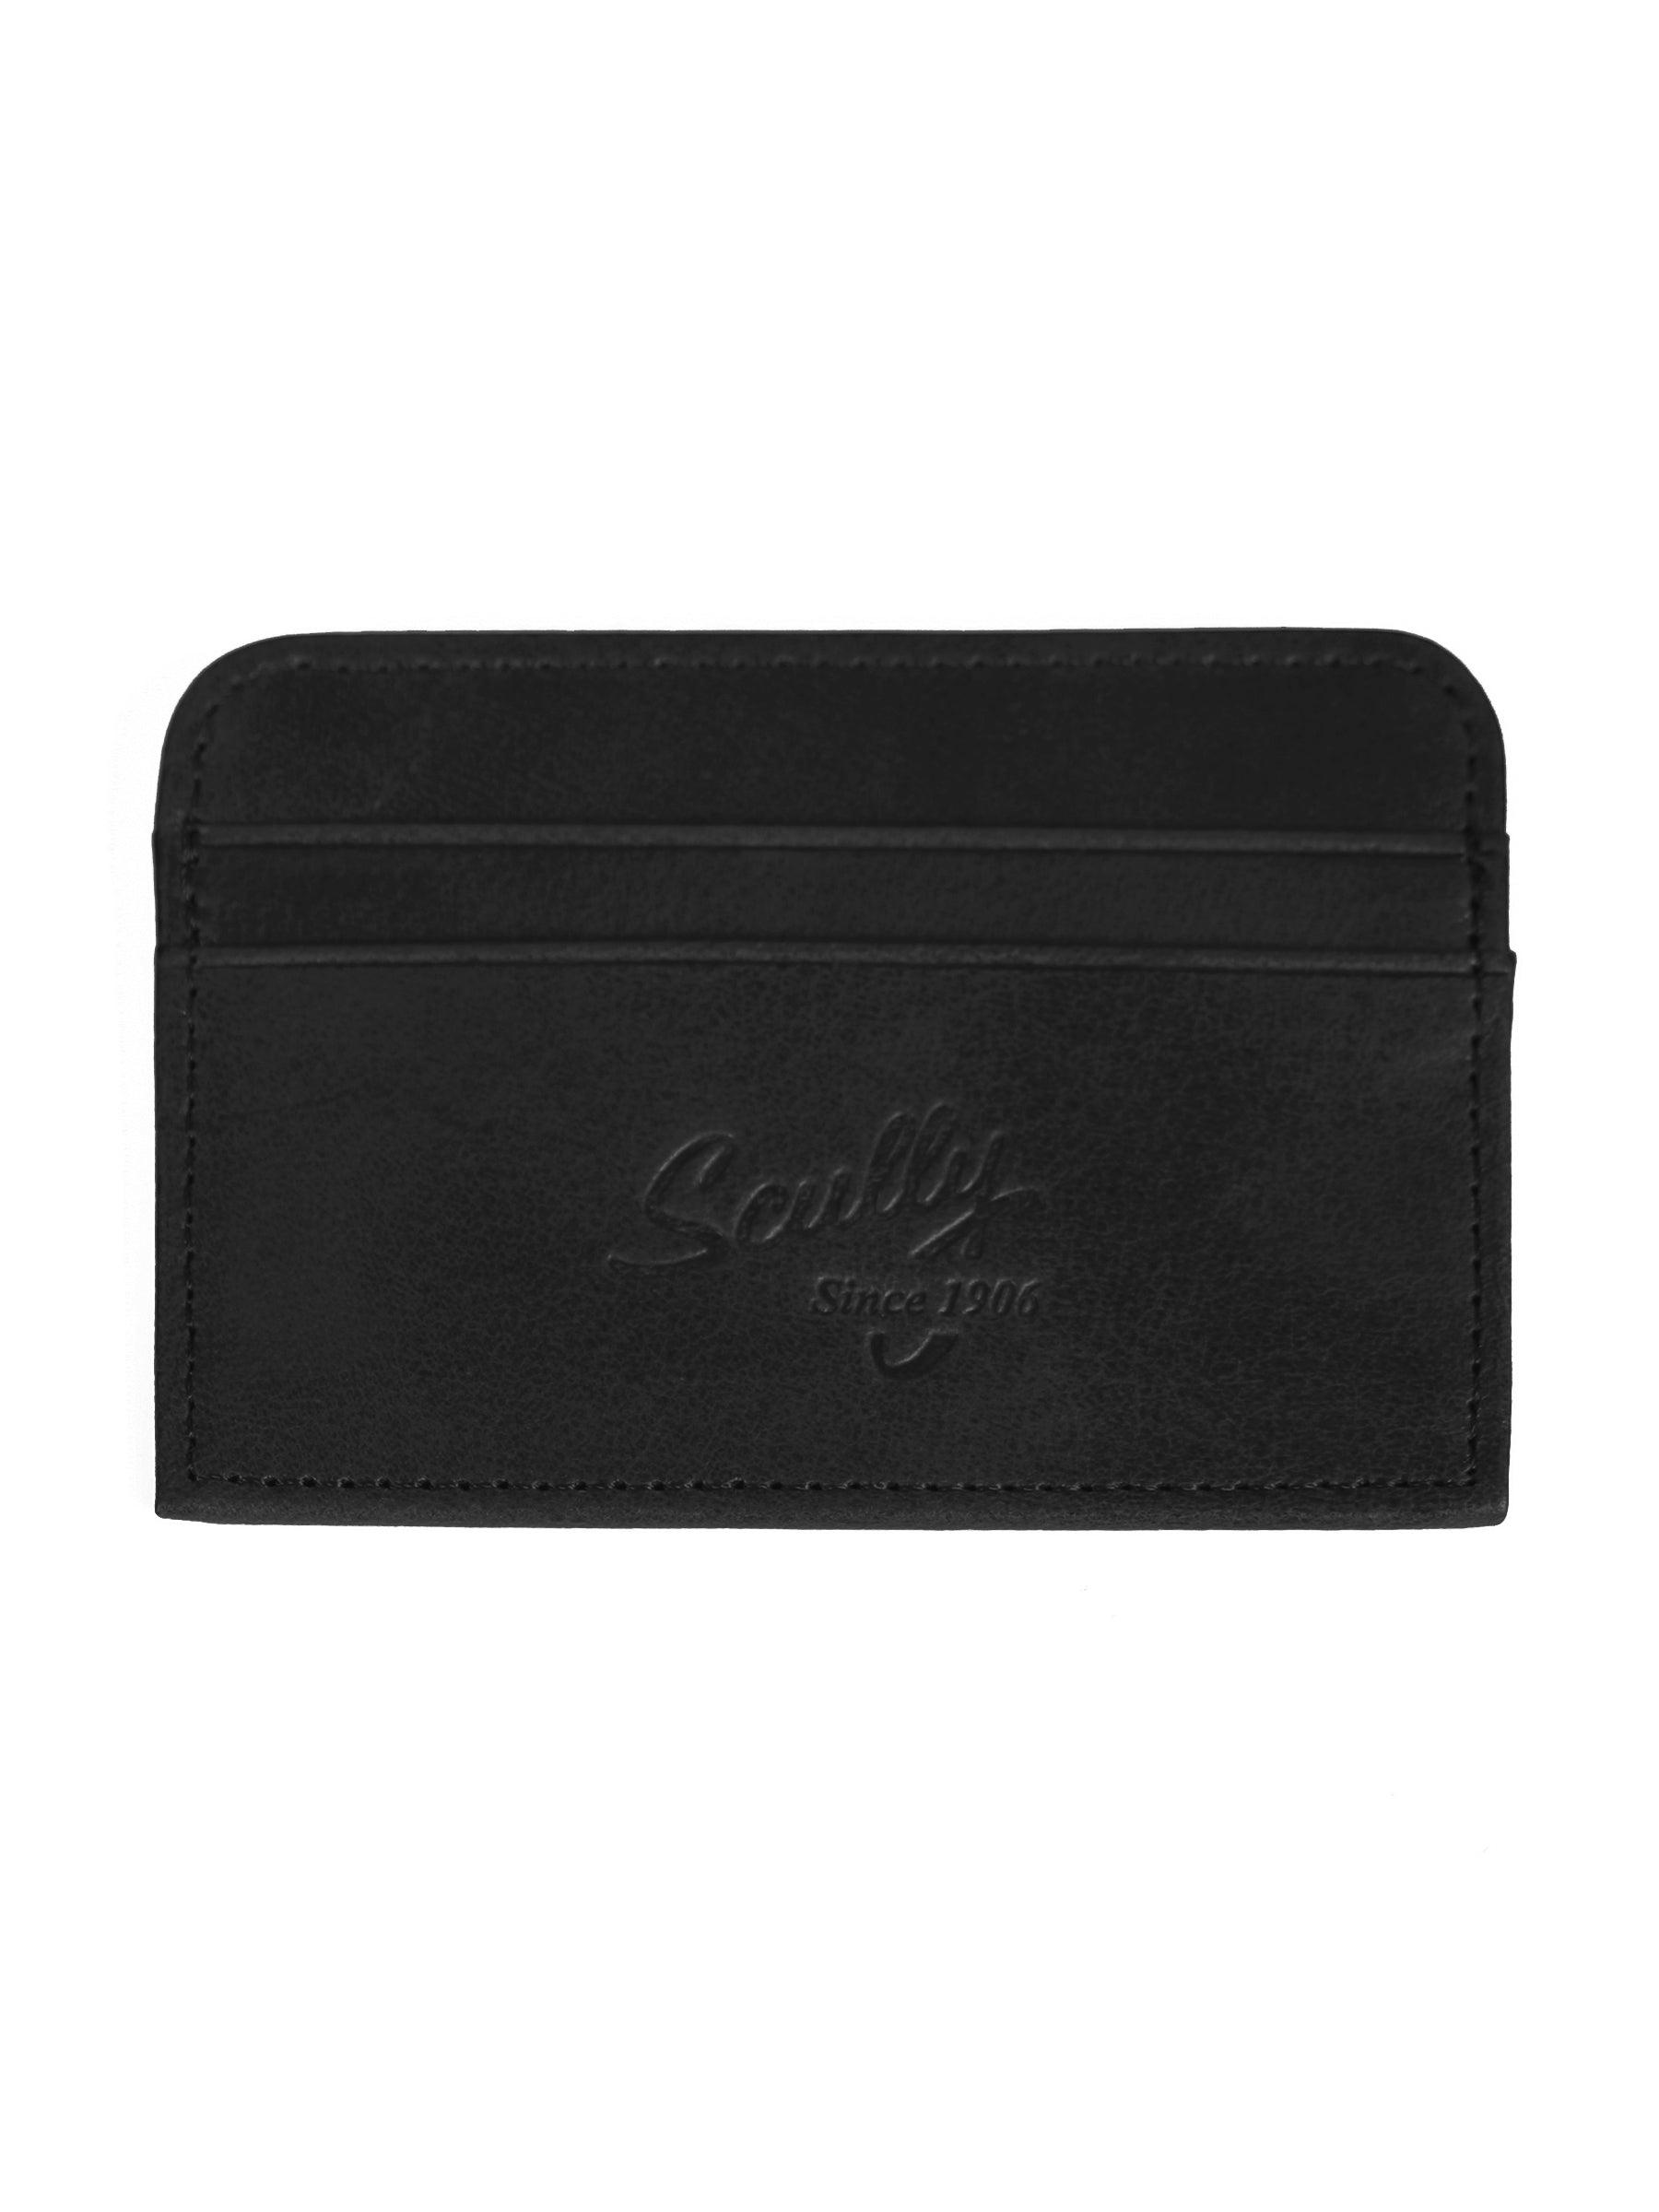 Scully Leather Harness Ranger Leather Black Card Case - Flyclothing LLC